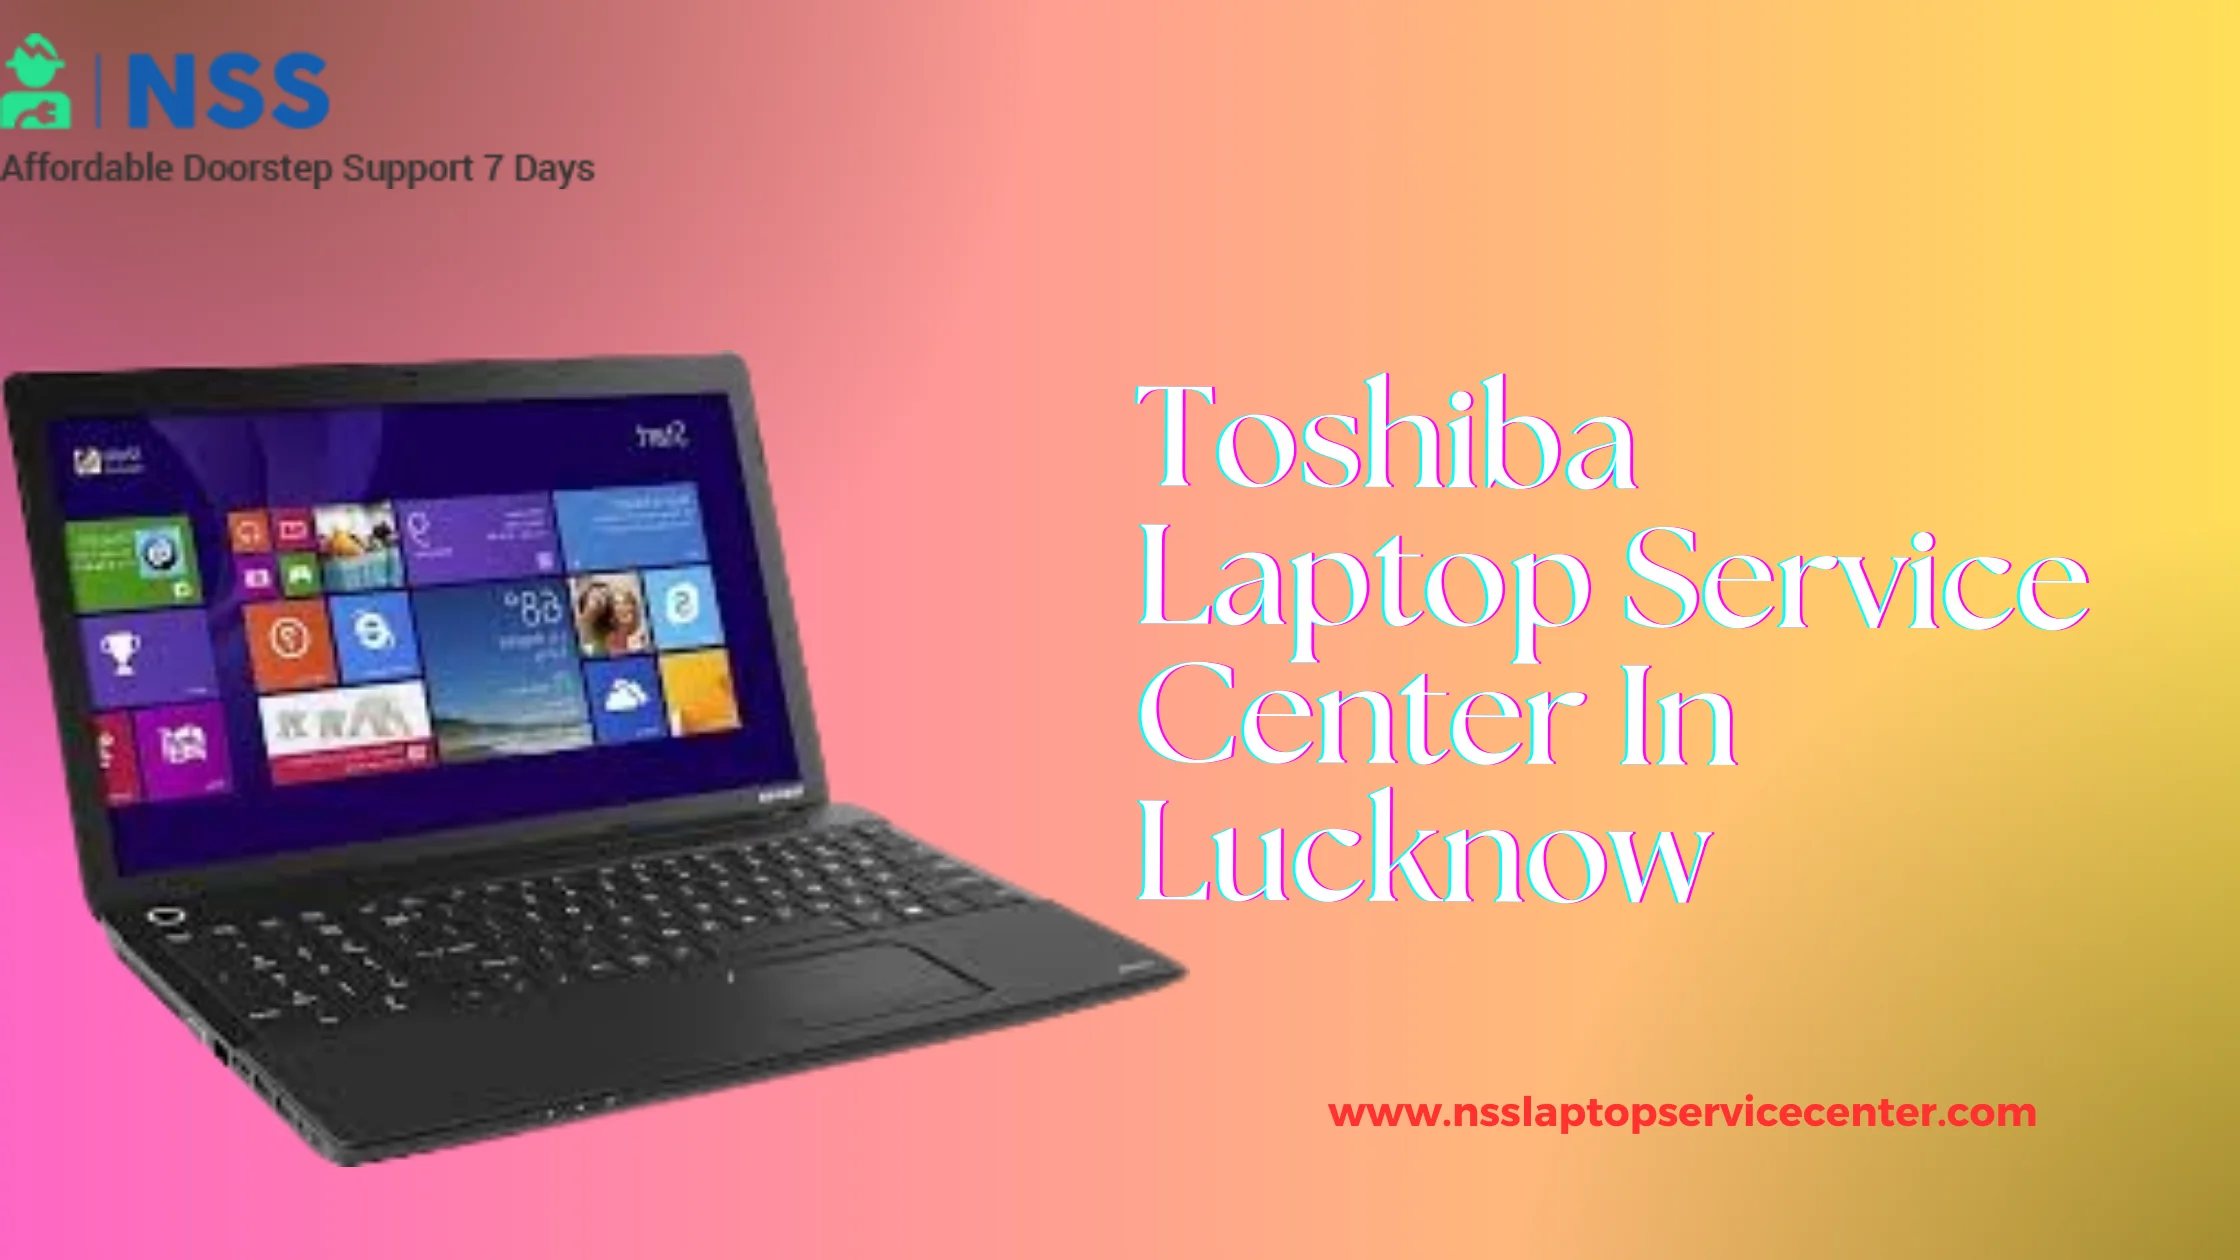 Toshiba Service Center In Lucknow